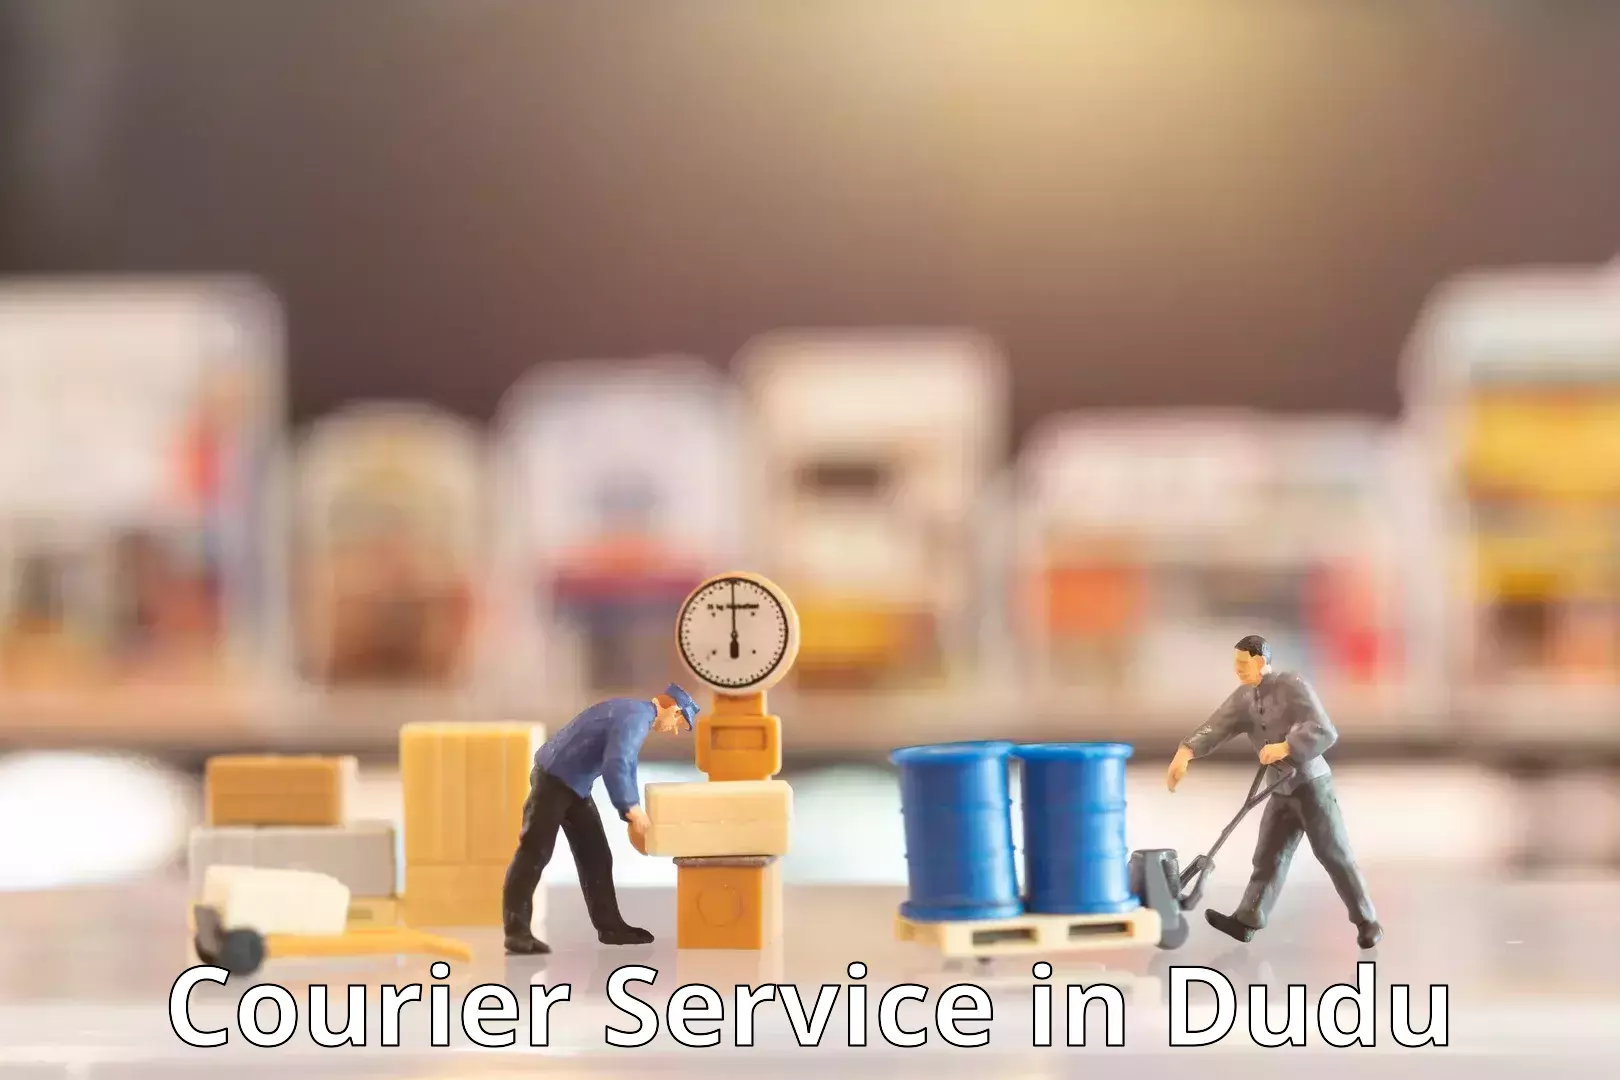 Residential courier service in Dudu